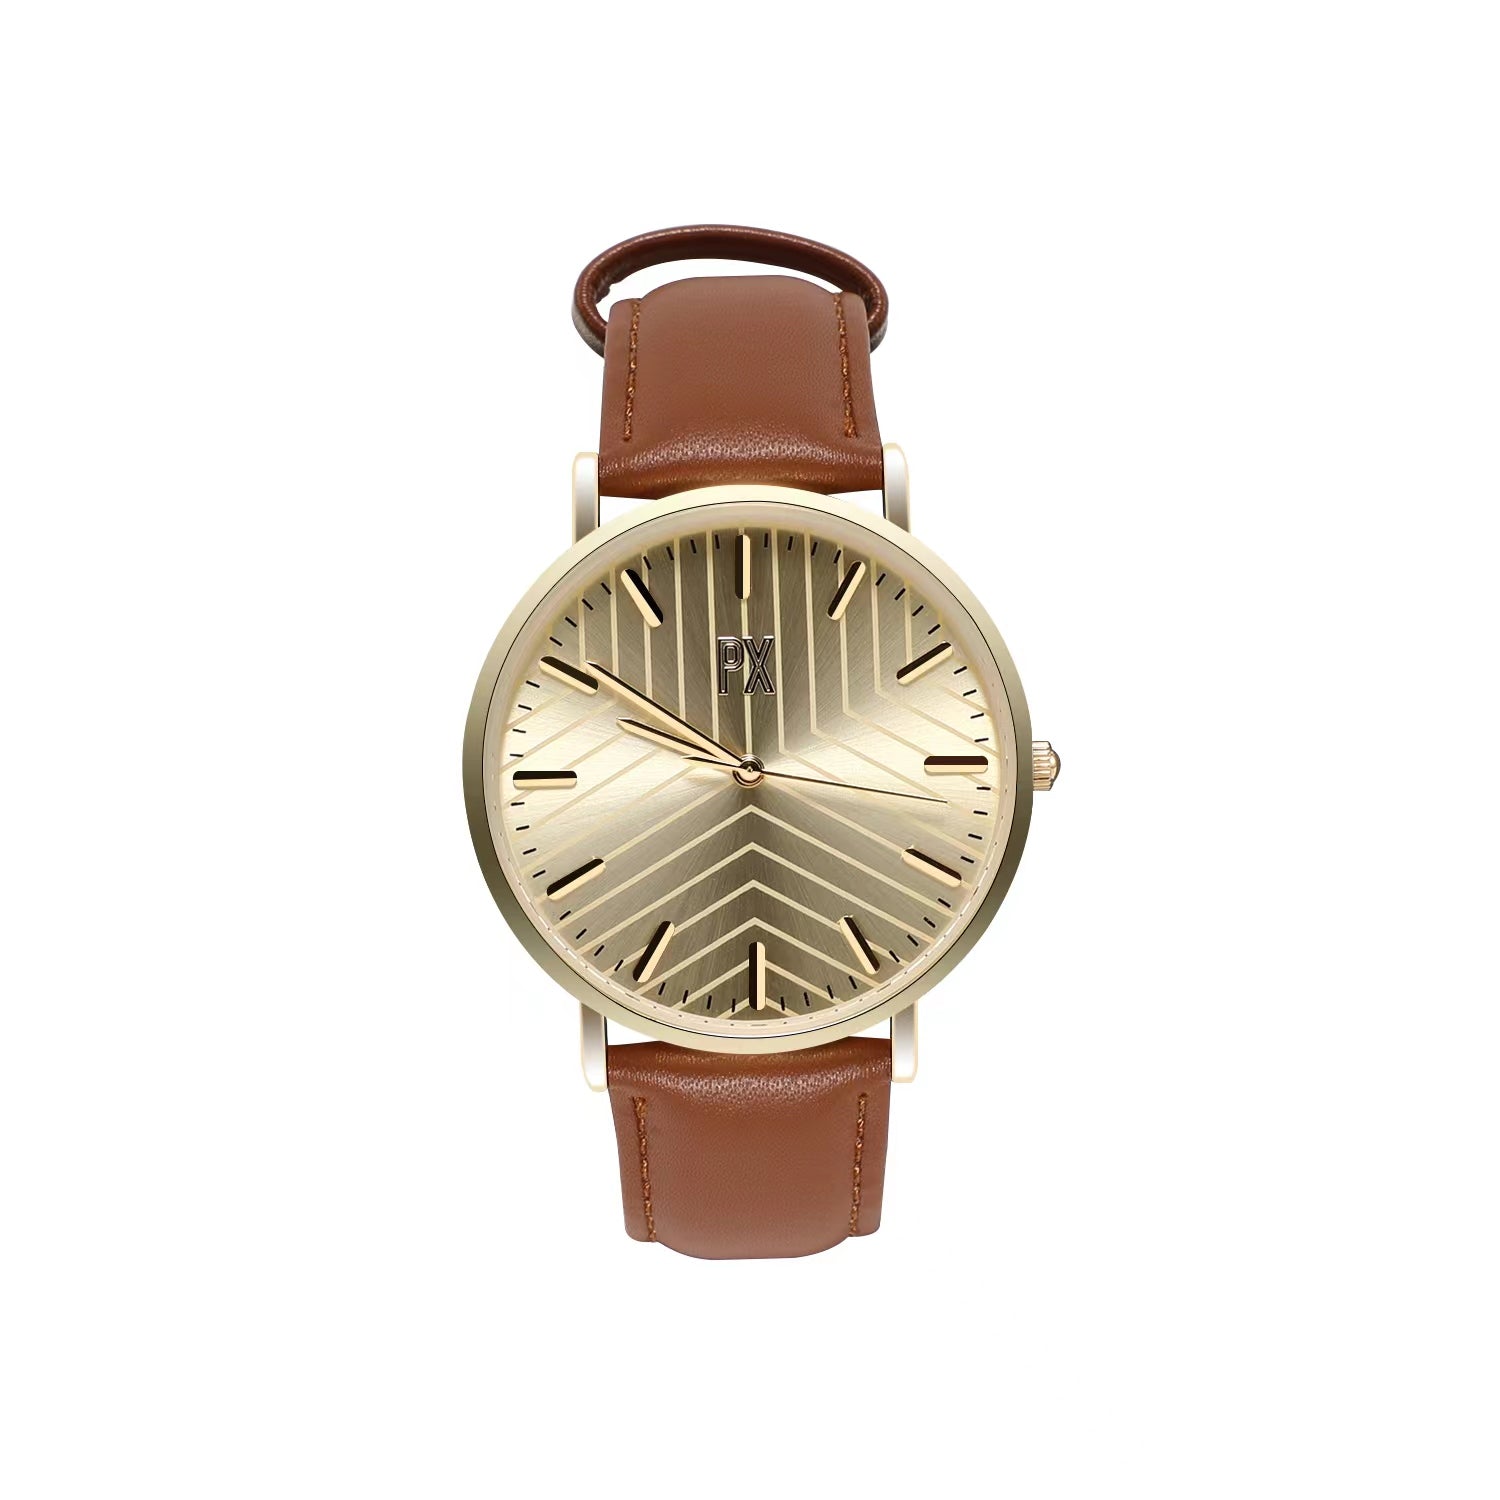 PX Cognac Strap Watch with Brown Printed Face